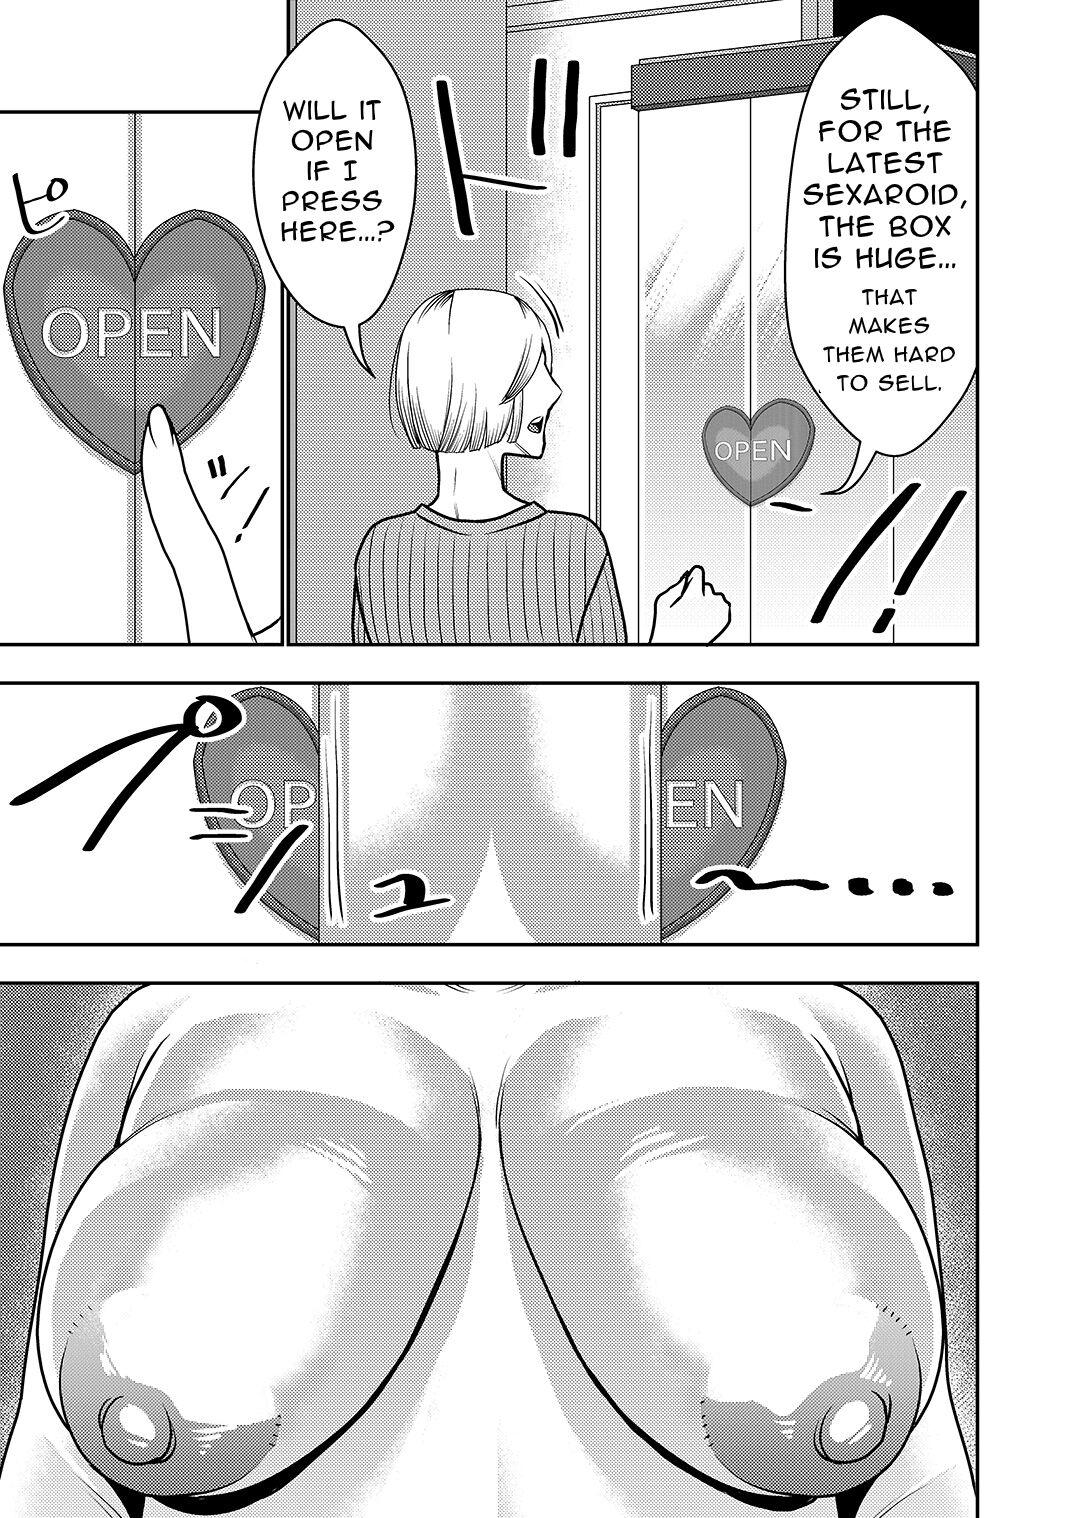 Secret This Defective Sexaroid is TOO LEWD, so I'm thinking of returning it! - Original Putaria - Page 3